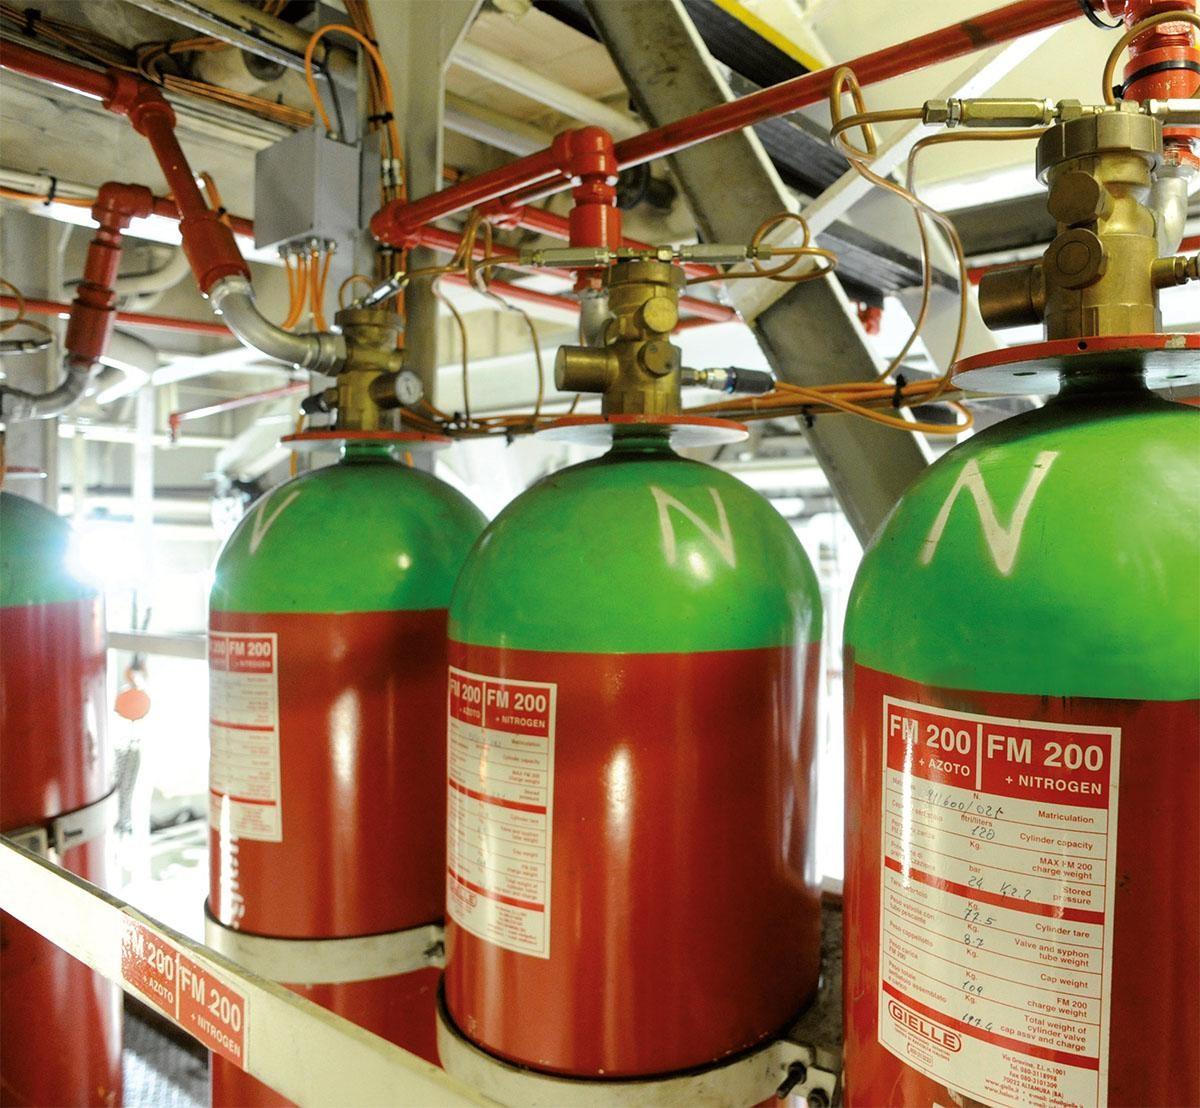 Why is FM-200 the Best Fire Suppression System?